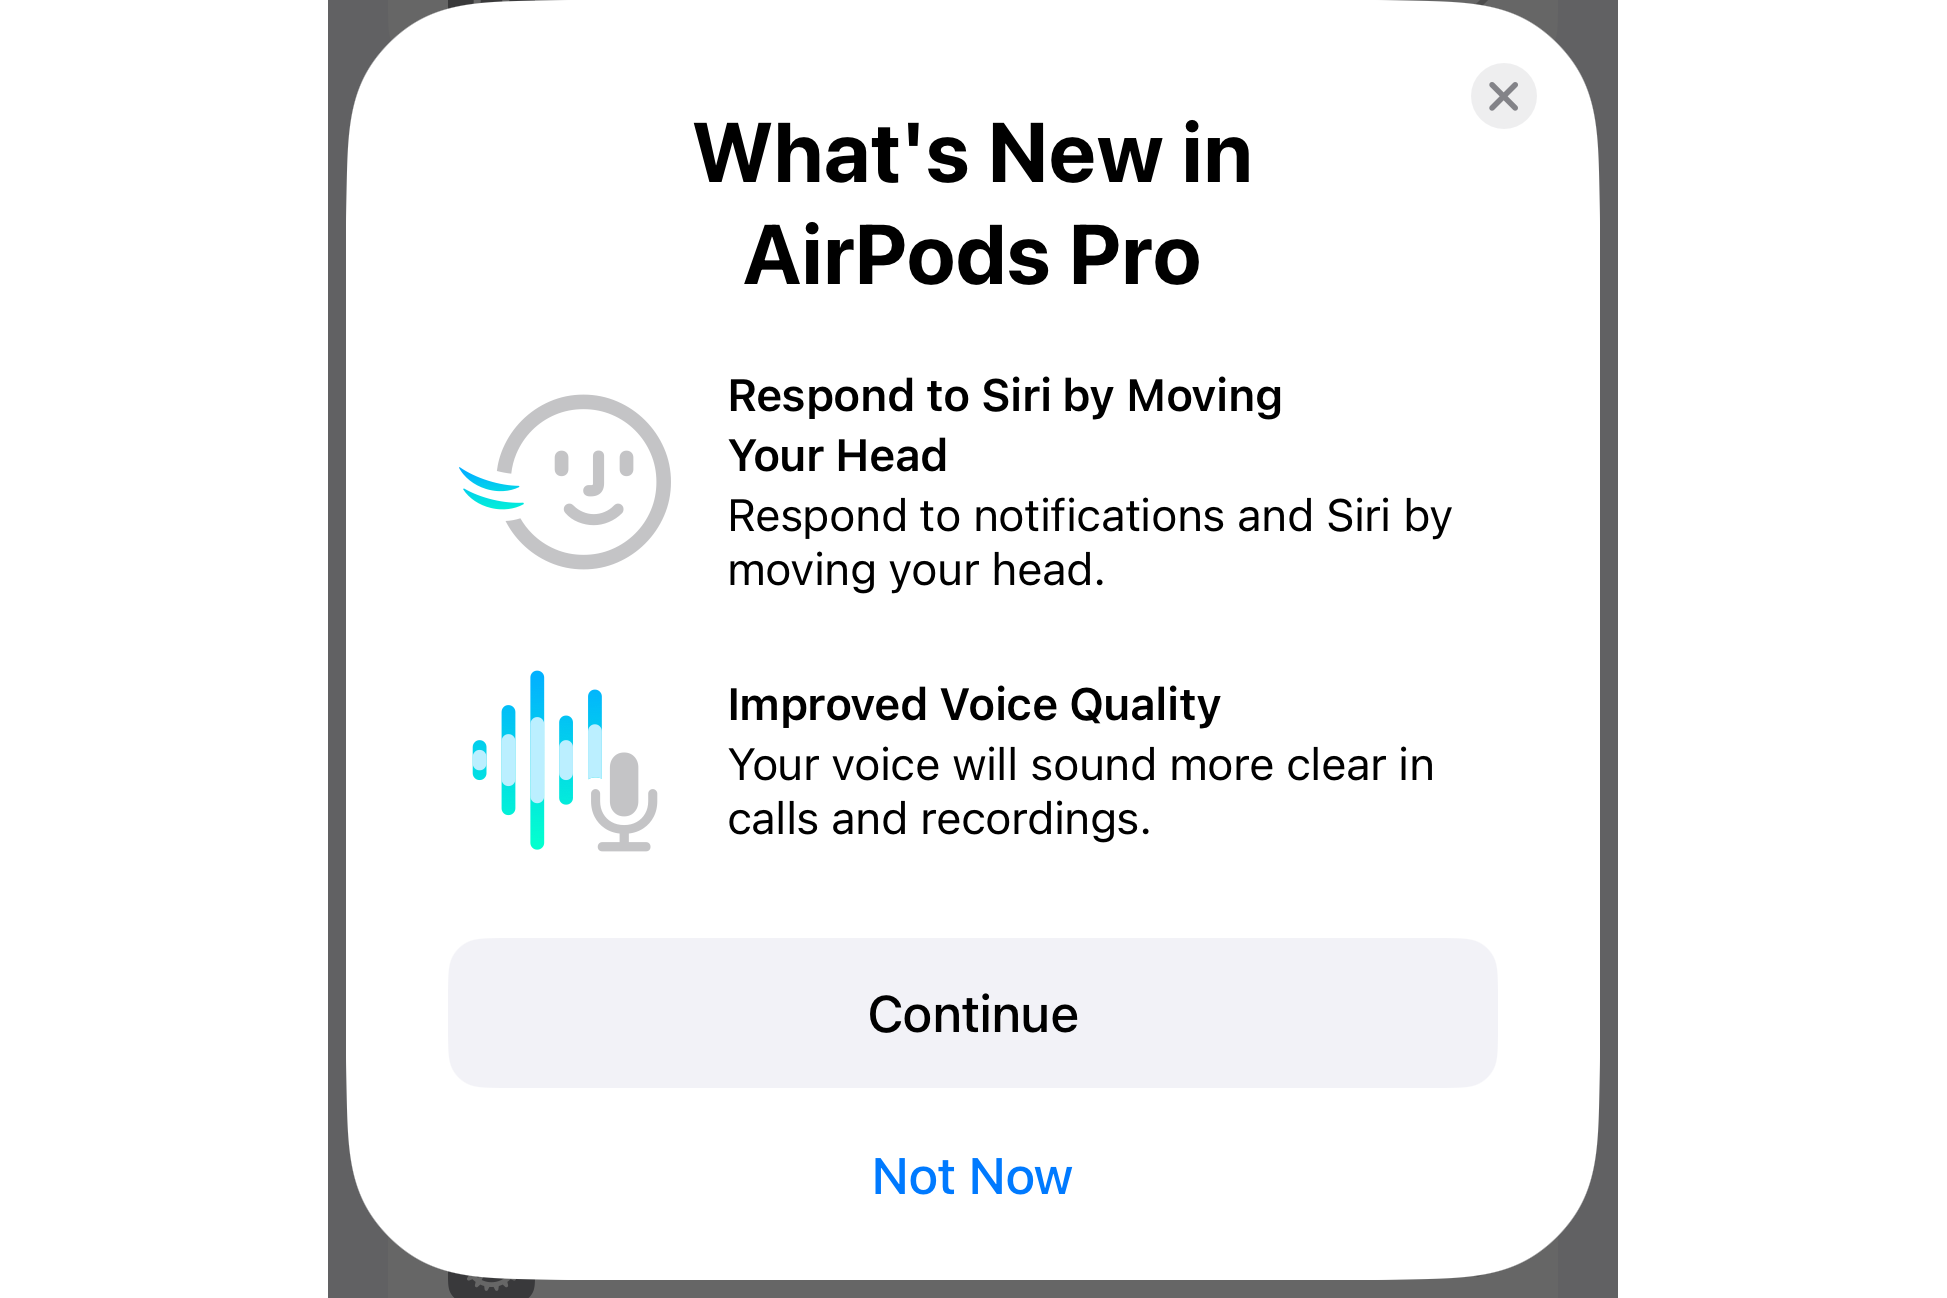 An AirPods card on iPhone listing new features like voice isolation and responding to Siri with head movement.